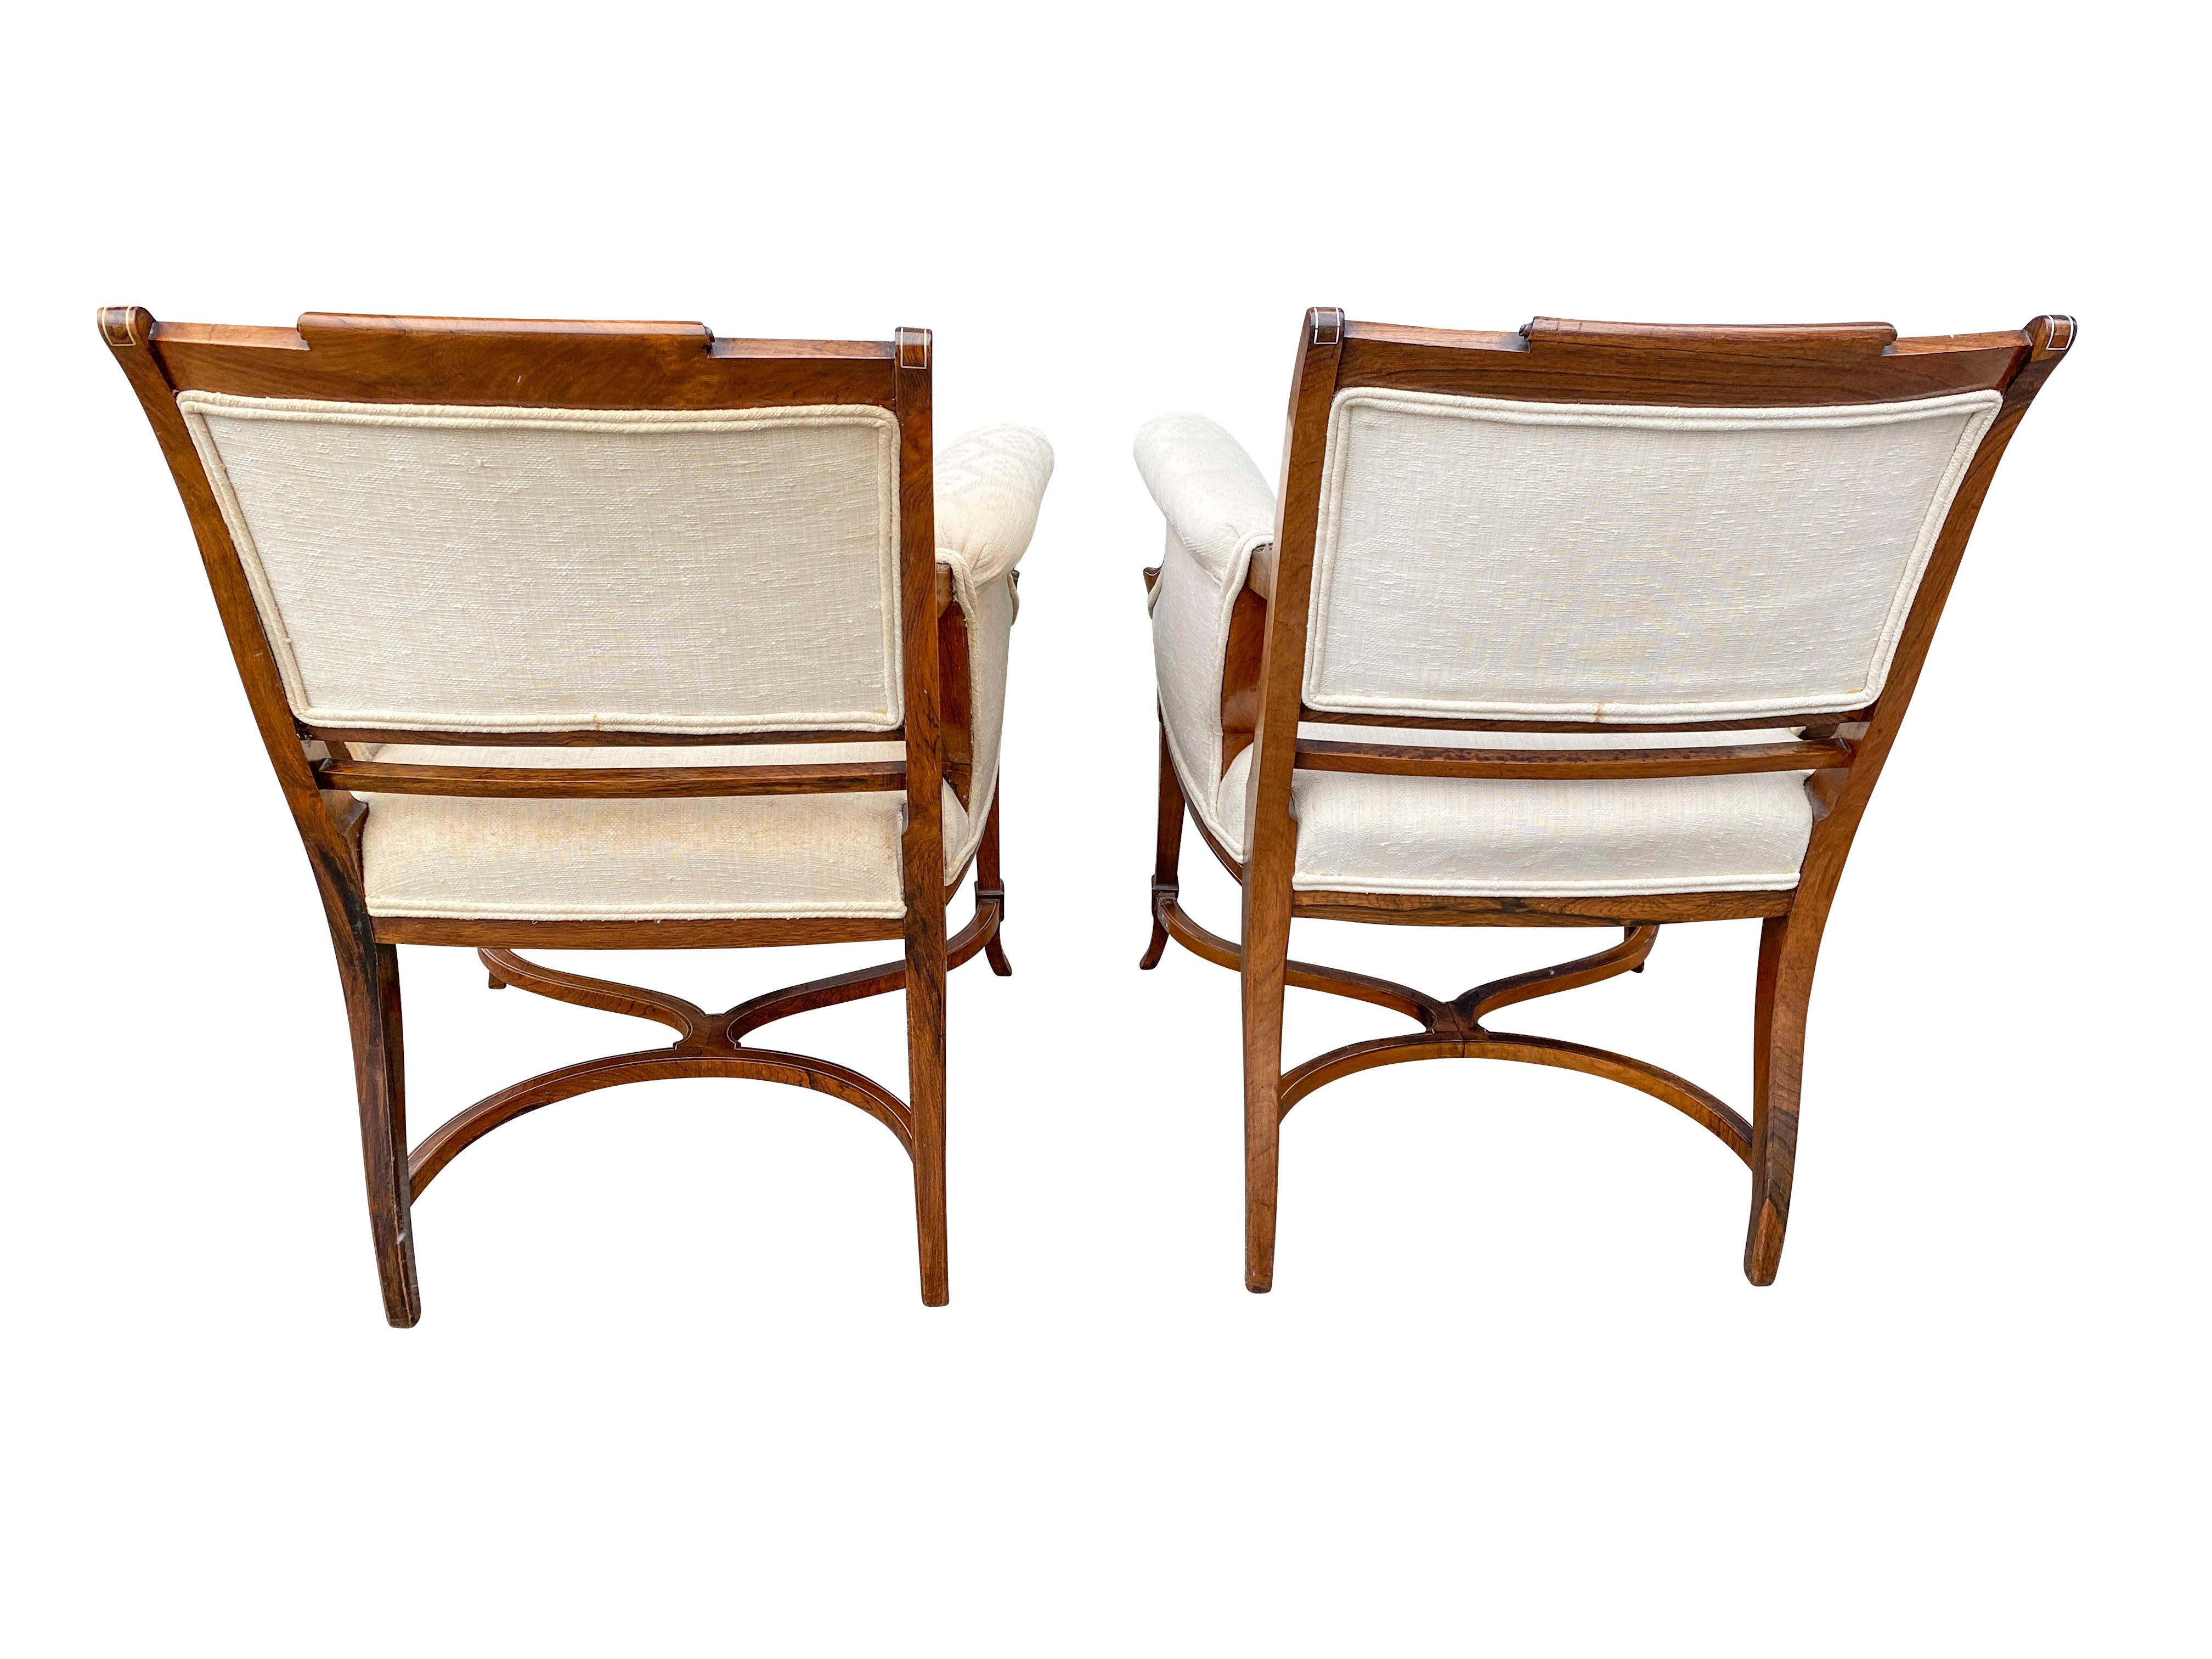 Late 19th Century Pair of Anglo-Japanese Rosewood and Inlaid Armchairs, Collinson & Lock